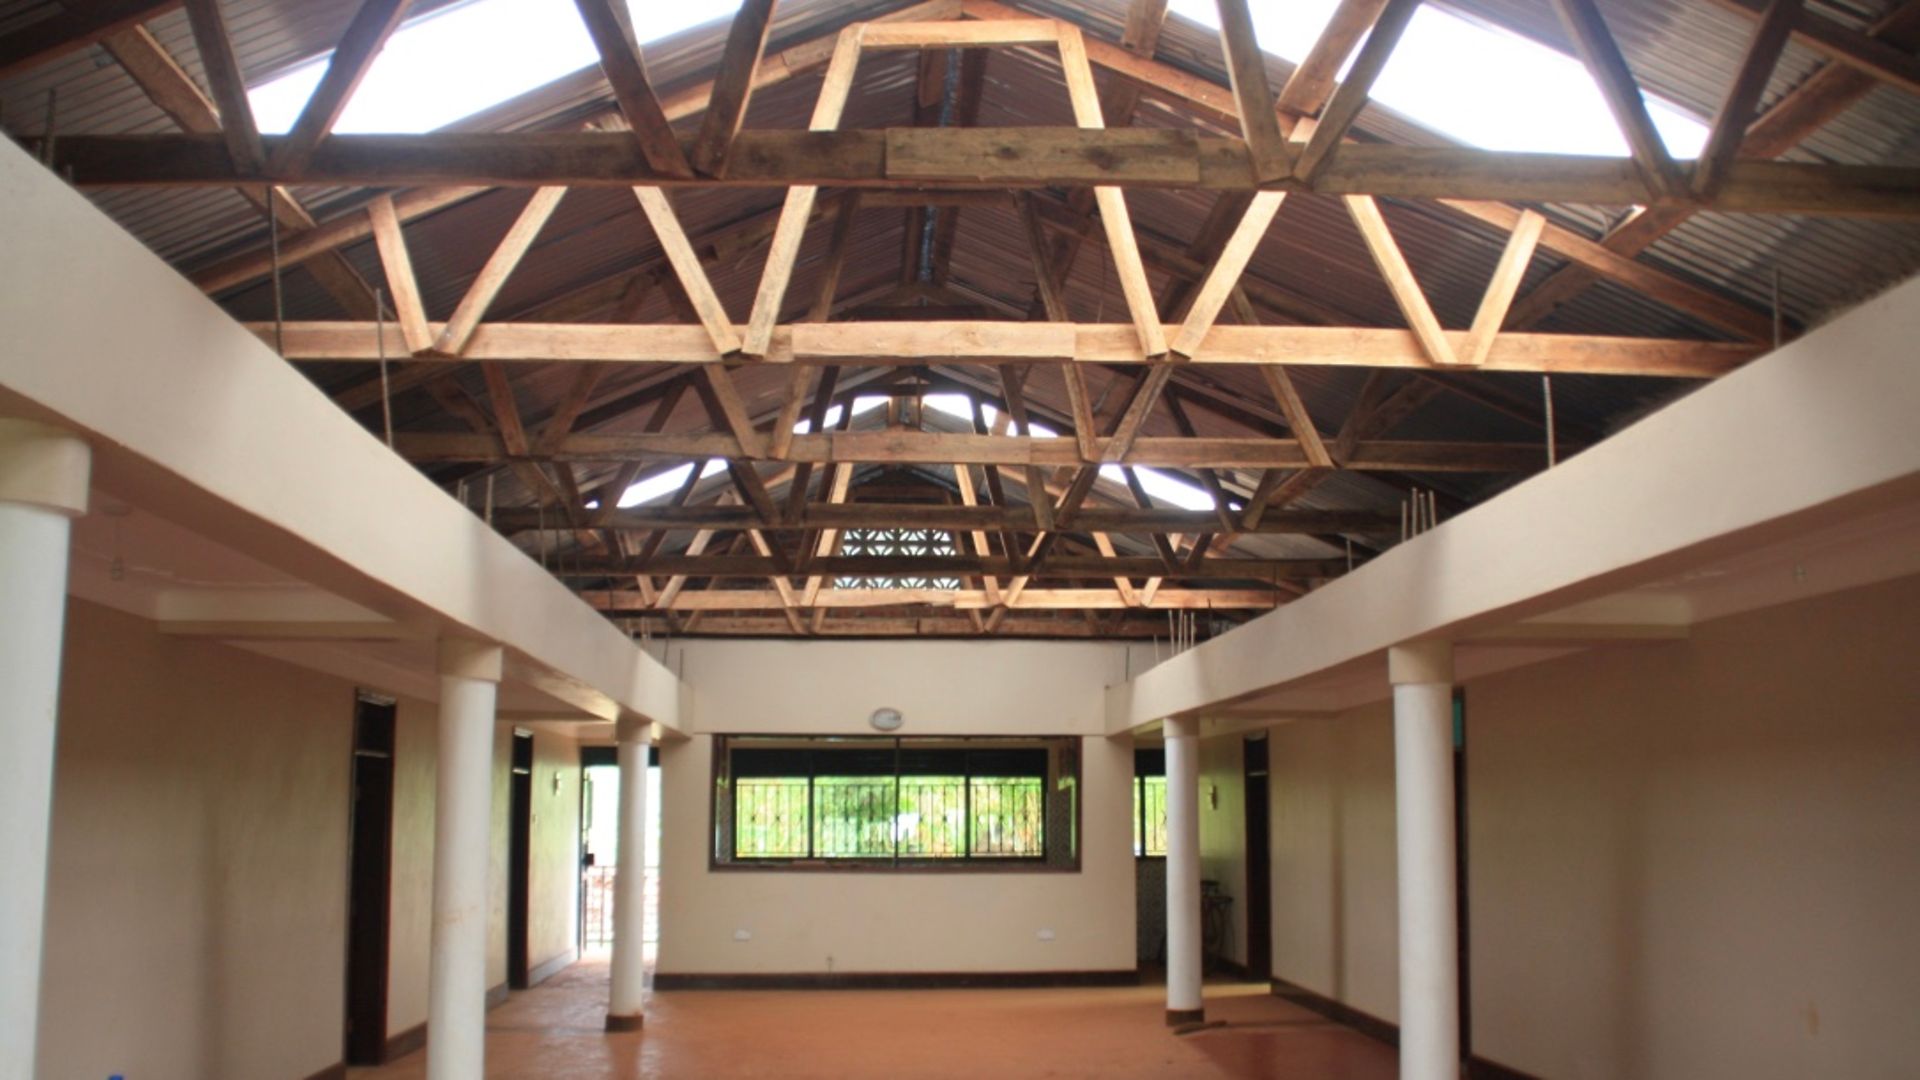 The interior of the girl’s new residential building